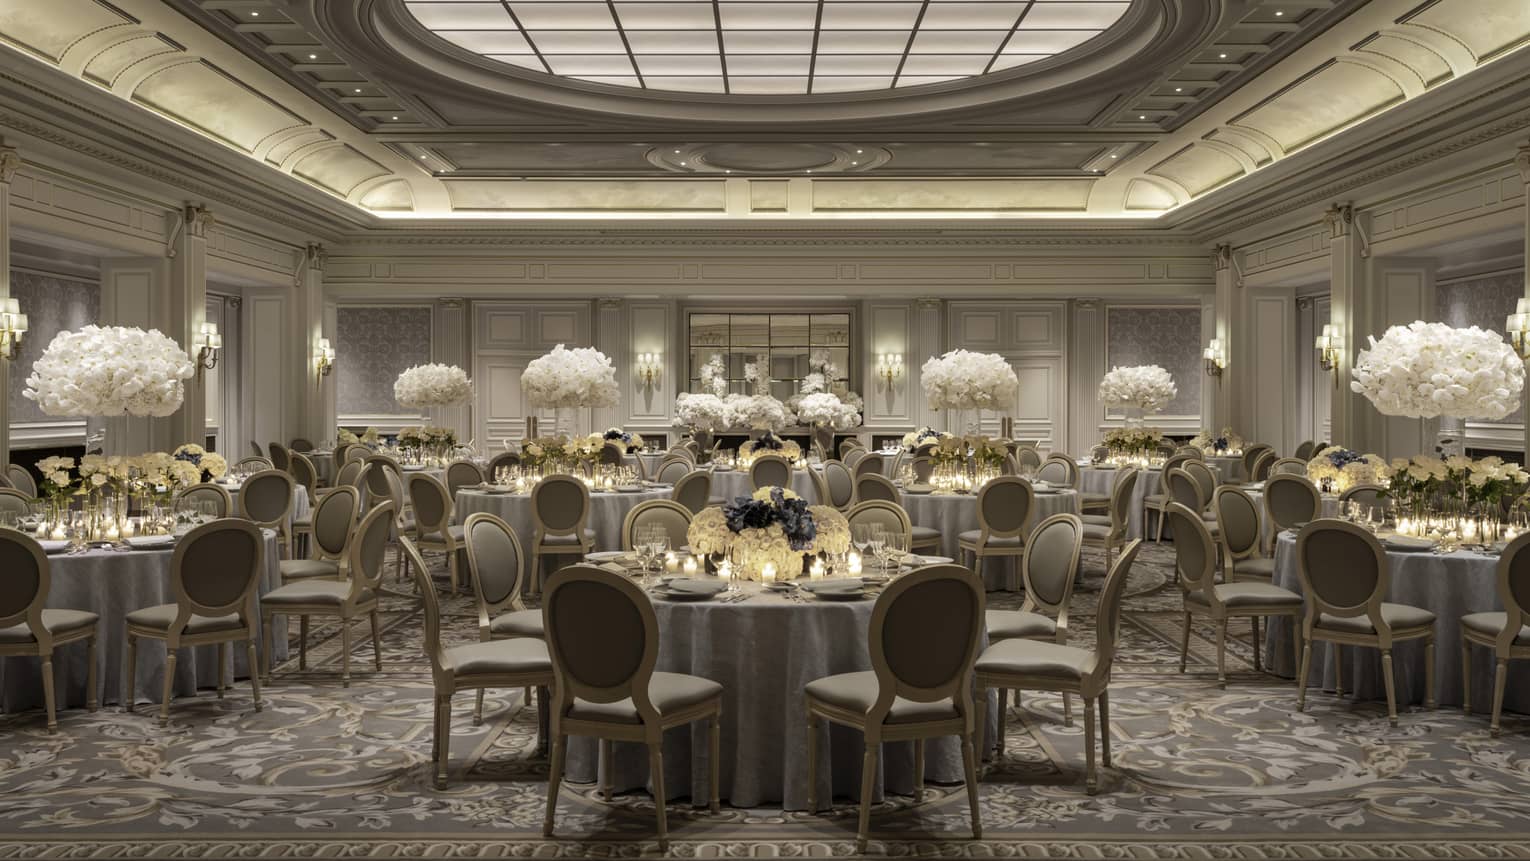 Elegant Paris banquet room, dining tables with white floral centrepieces under decorative domed ceiling